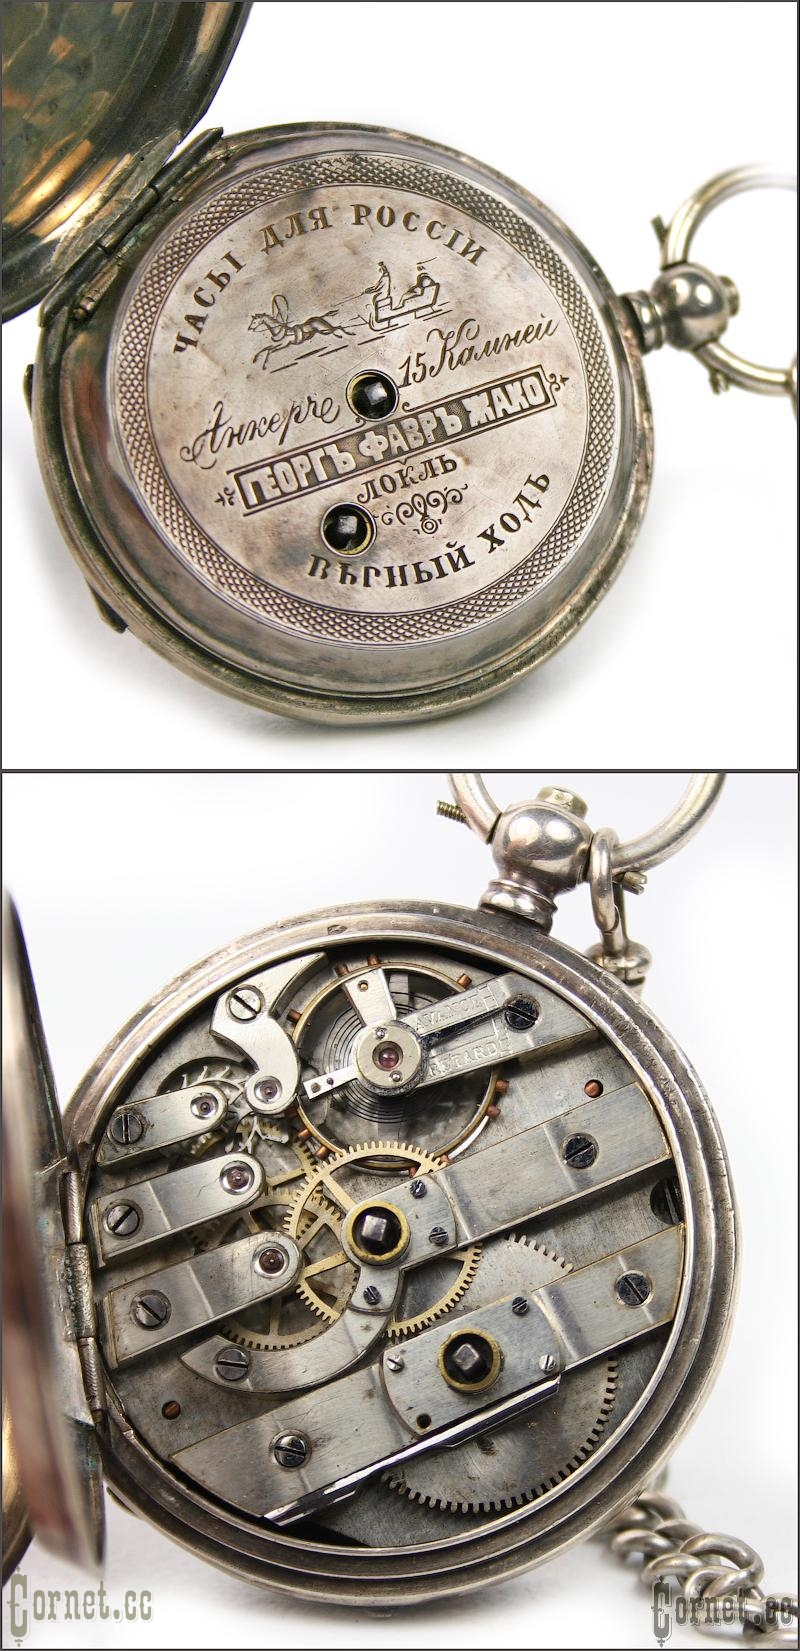 Prize watch of Russian military (prize-winning) for gunners